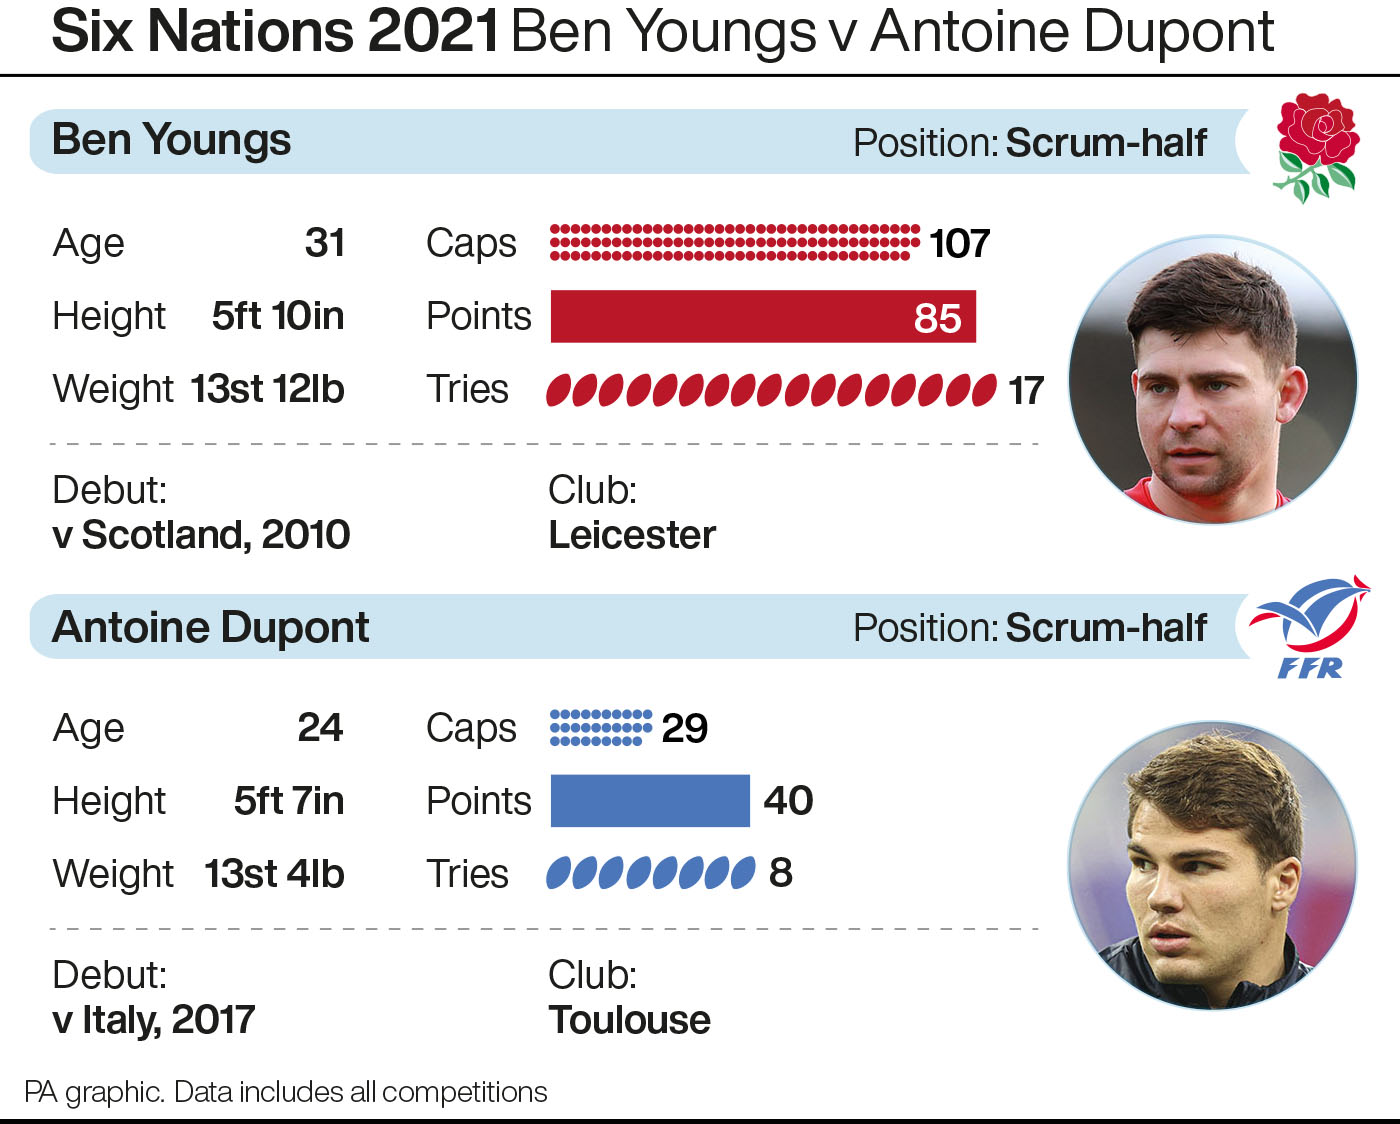 PA graphic showing a head-to-head of Ben Youngs v Antoine Dupont